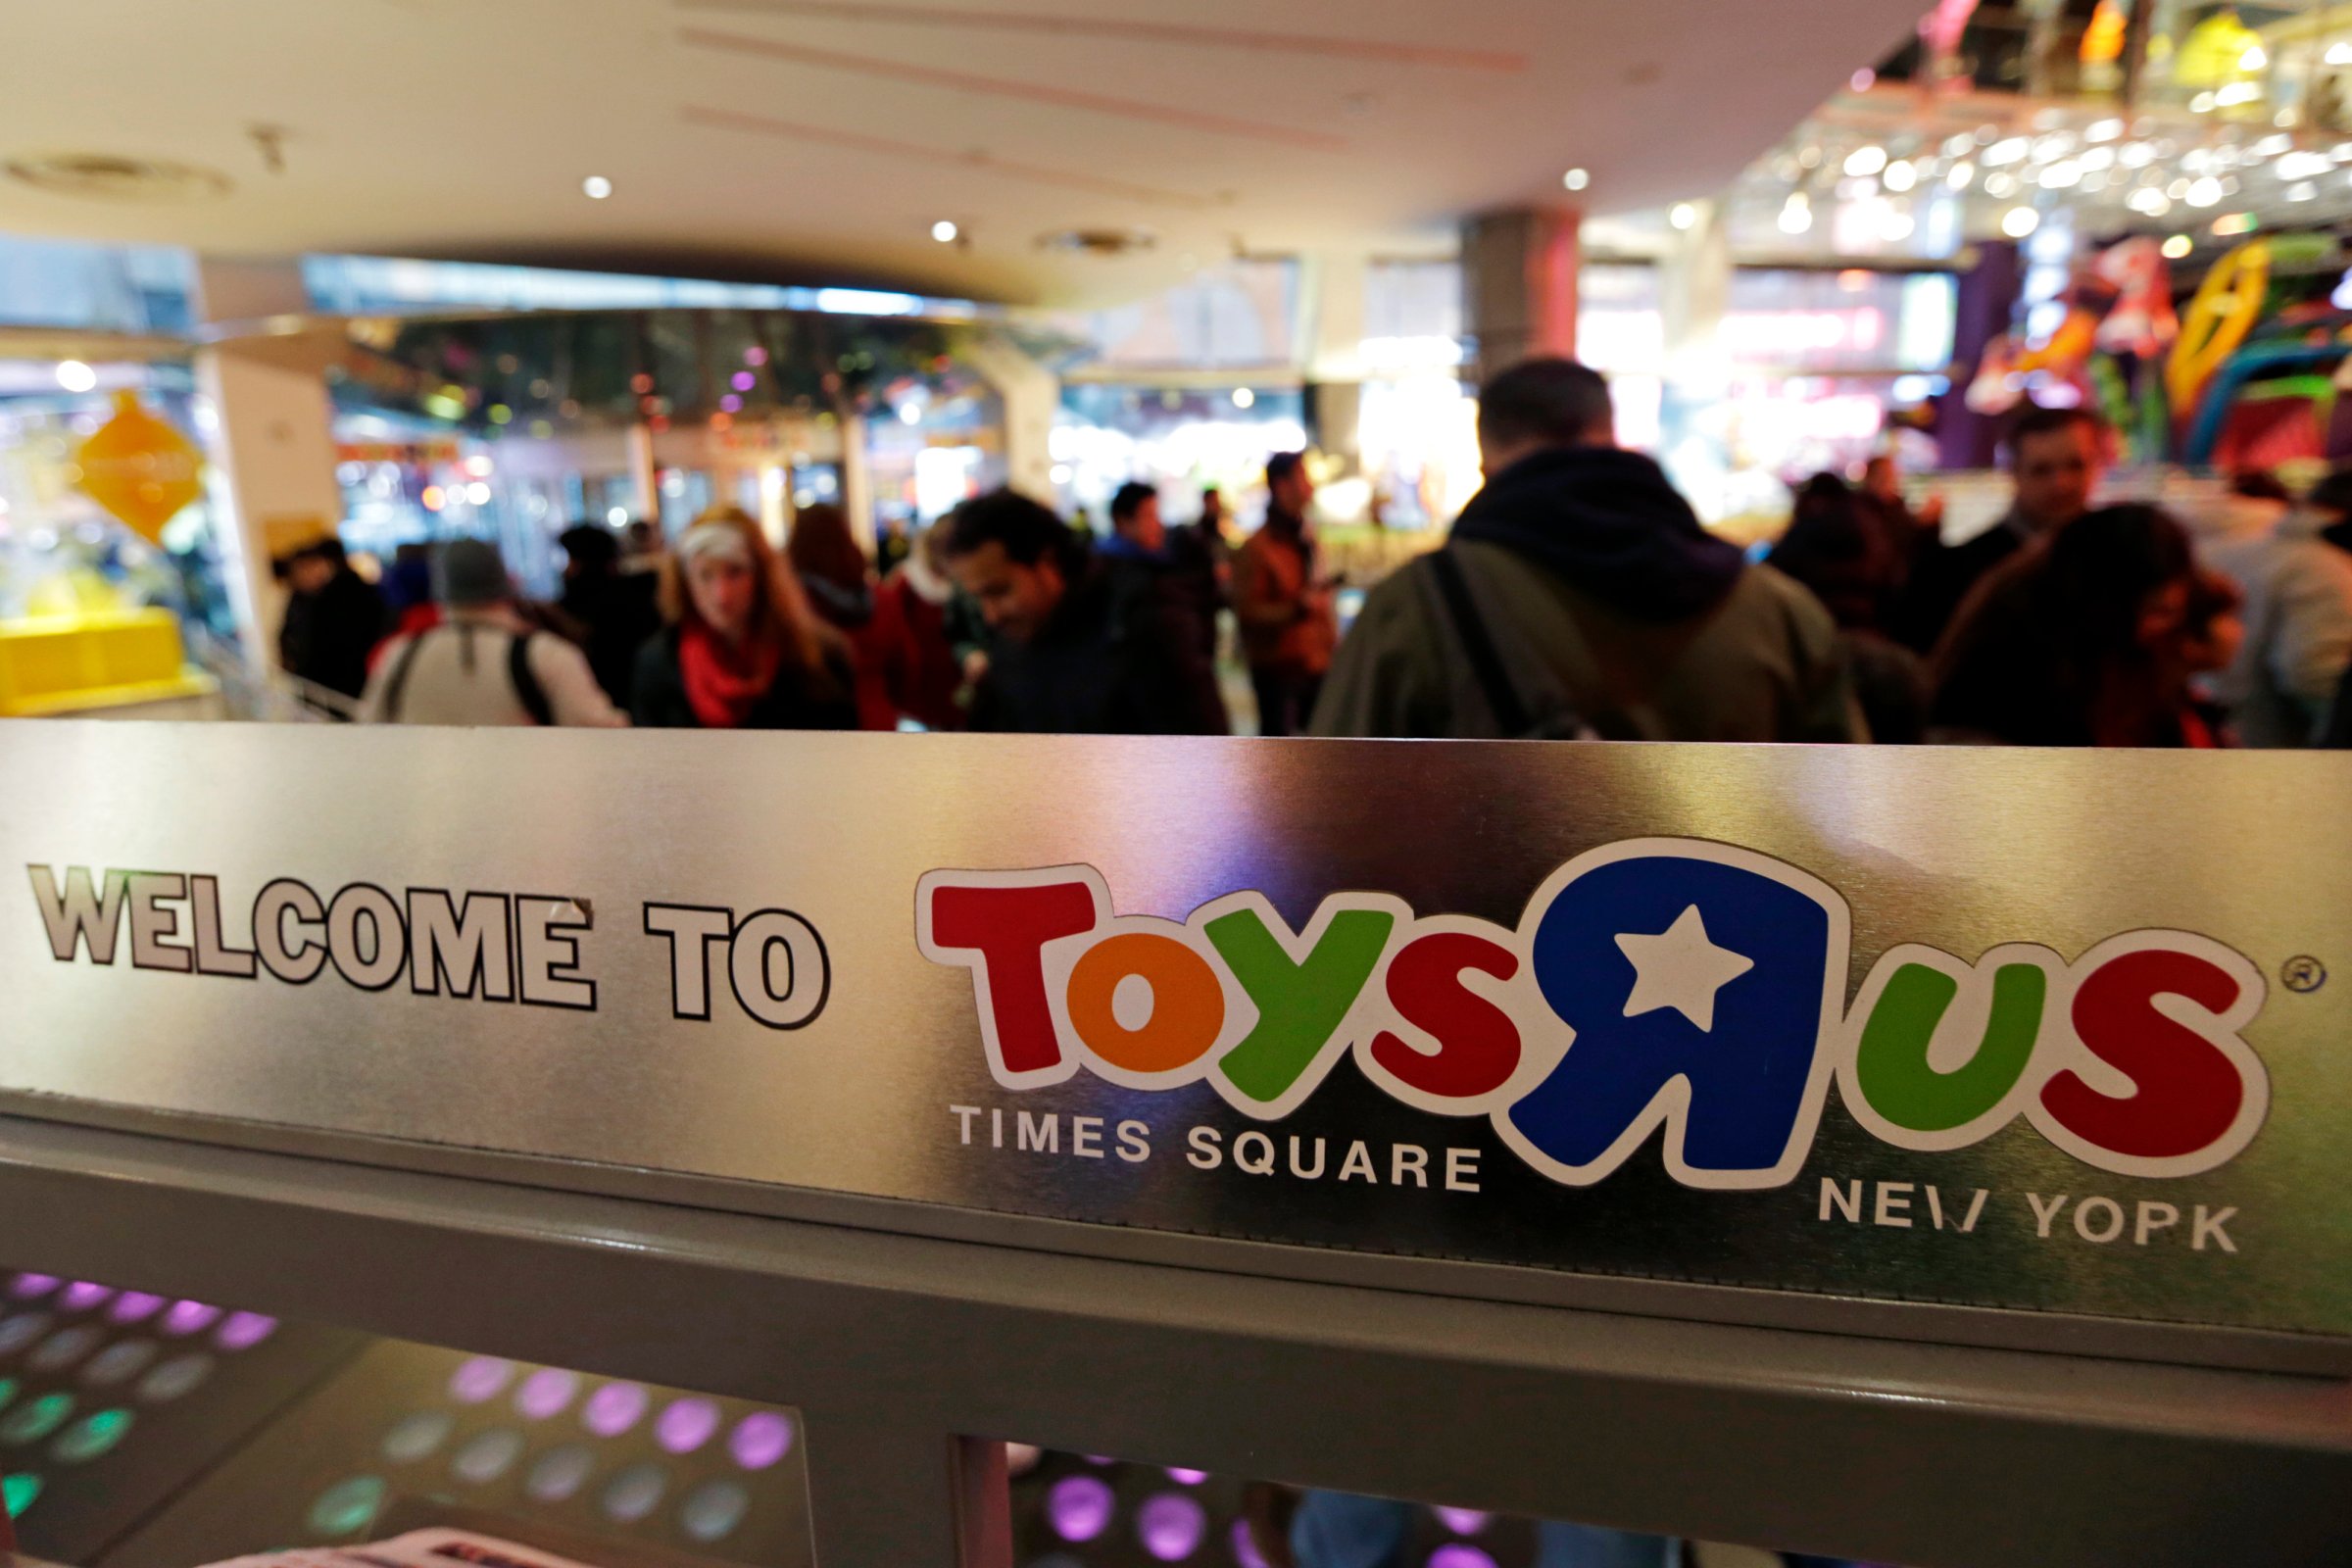 The Toys R Us Inc. logo is displayed inside a store ahead of Black Friday in New York, U.S., on Thursday, Nov. 27, 2014